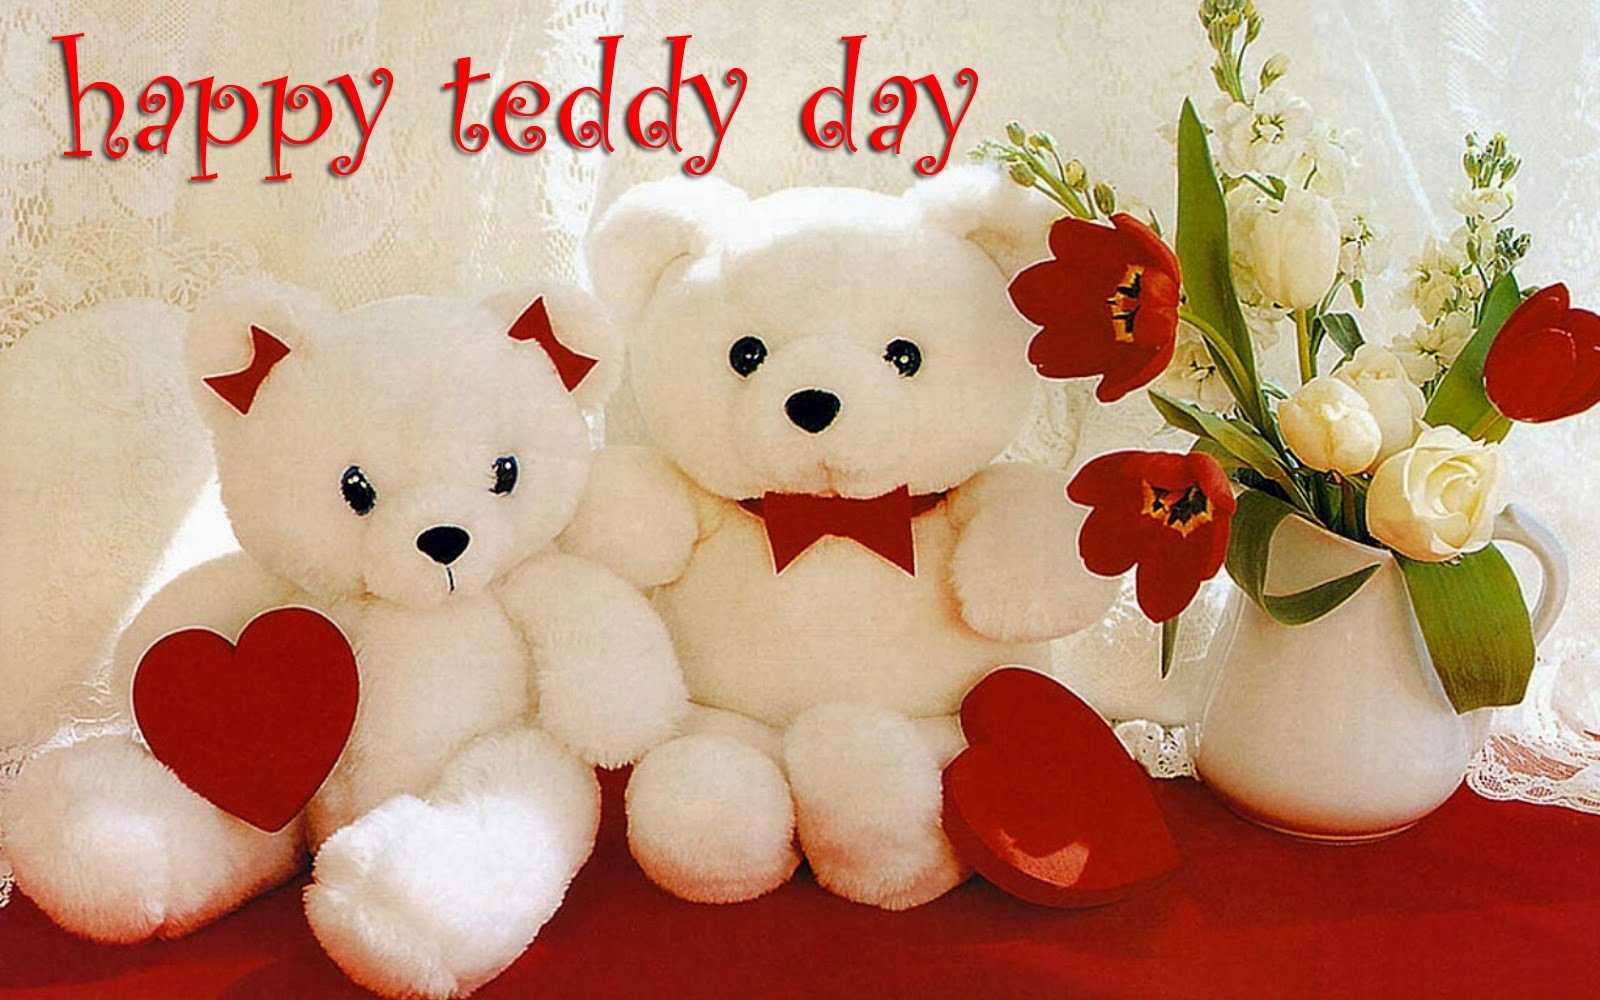 Happy Teddy day picture